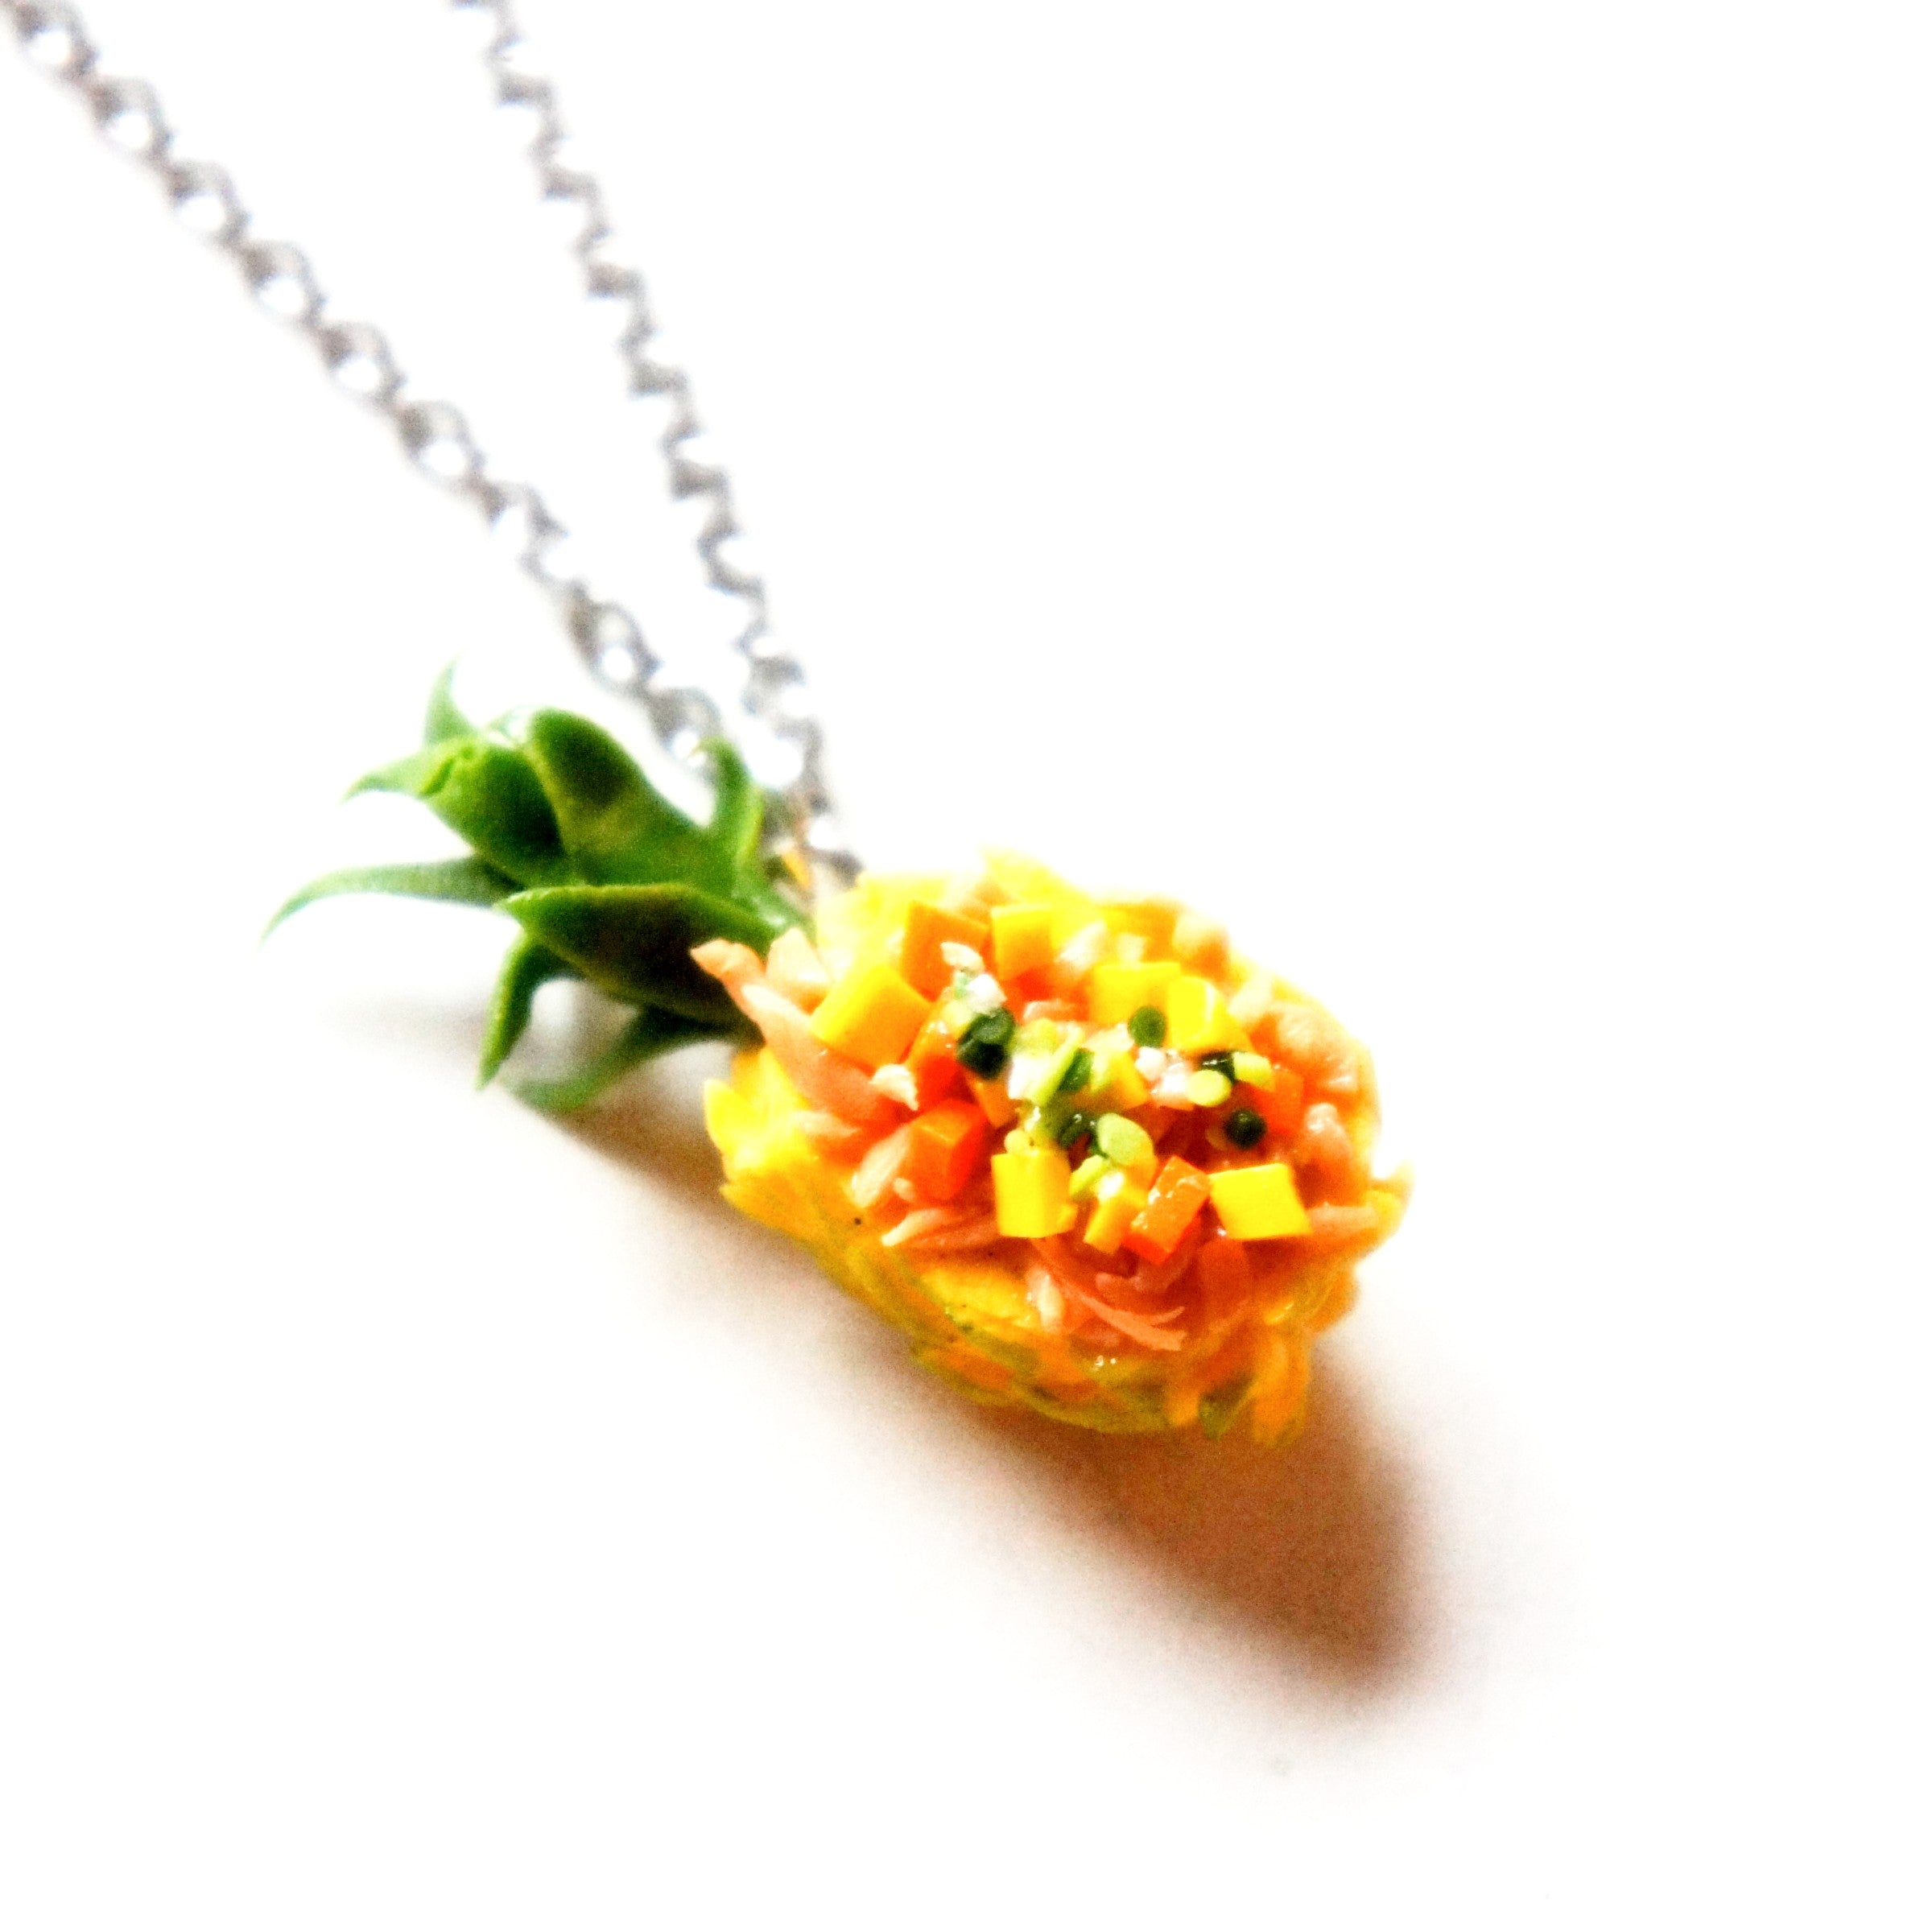 Pineapple Fried Rice Necklace - Jillicious charms and accessories